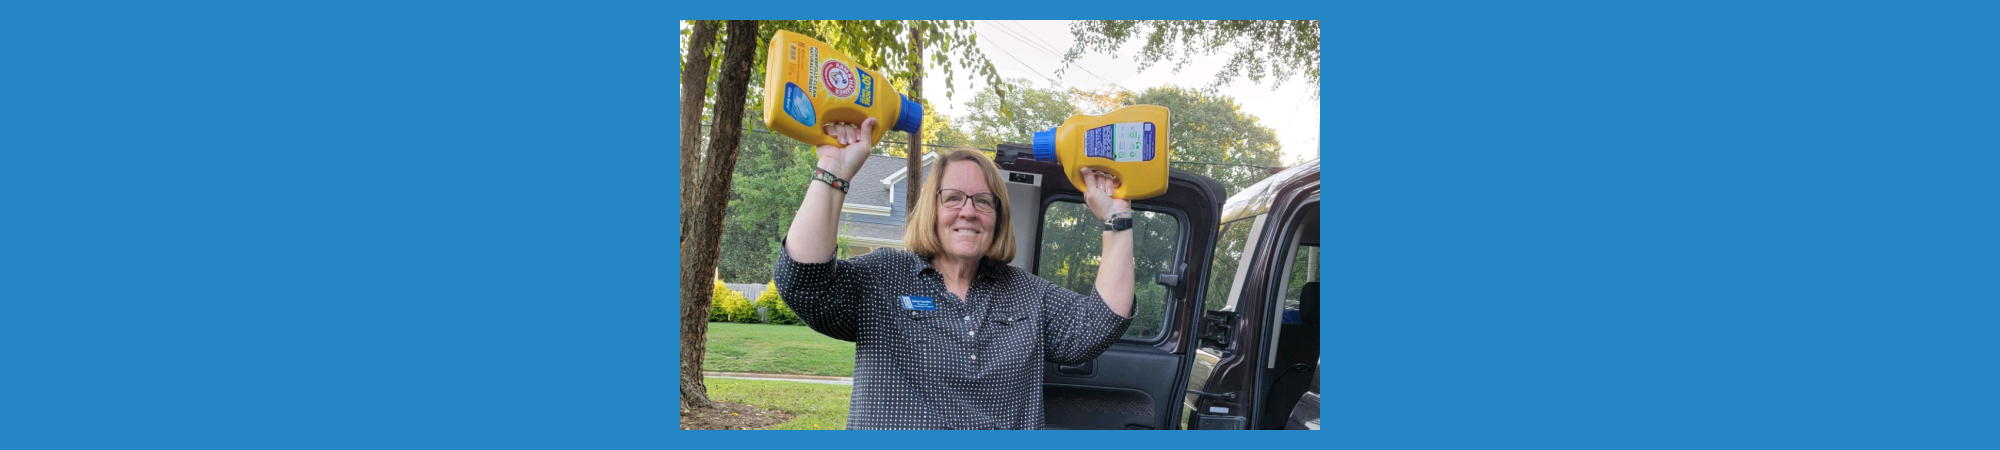 Help may be something as simple as providing laundry detergent for someone on a fixed income